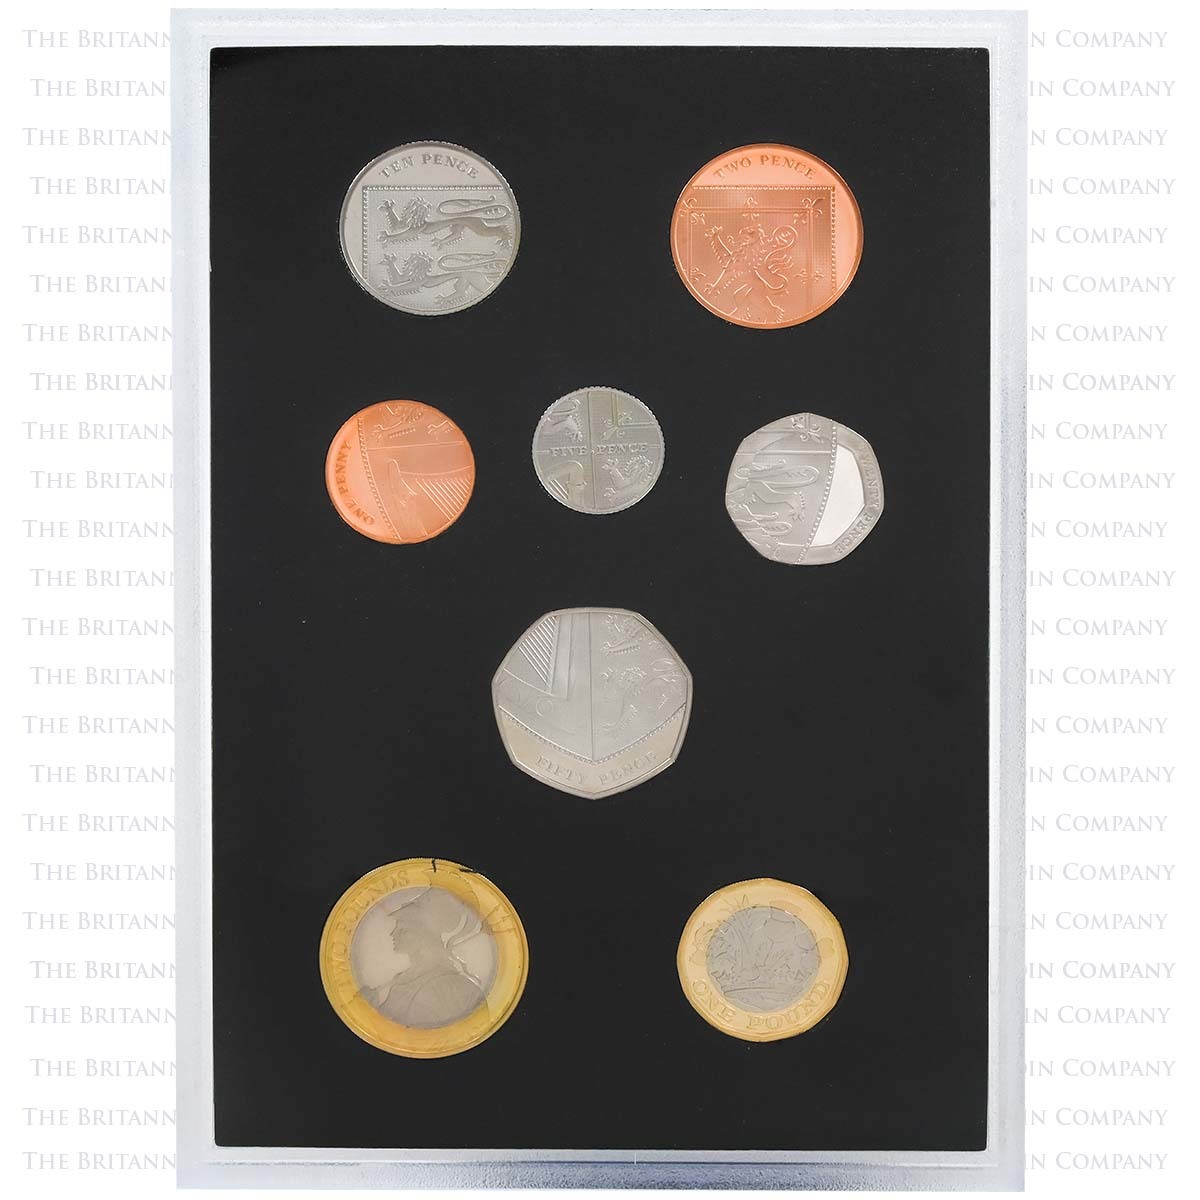 2018-proof-coin-set-collector-edtition-002-m